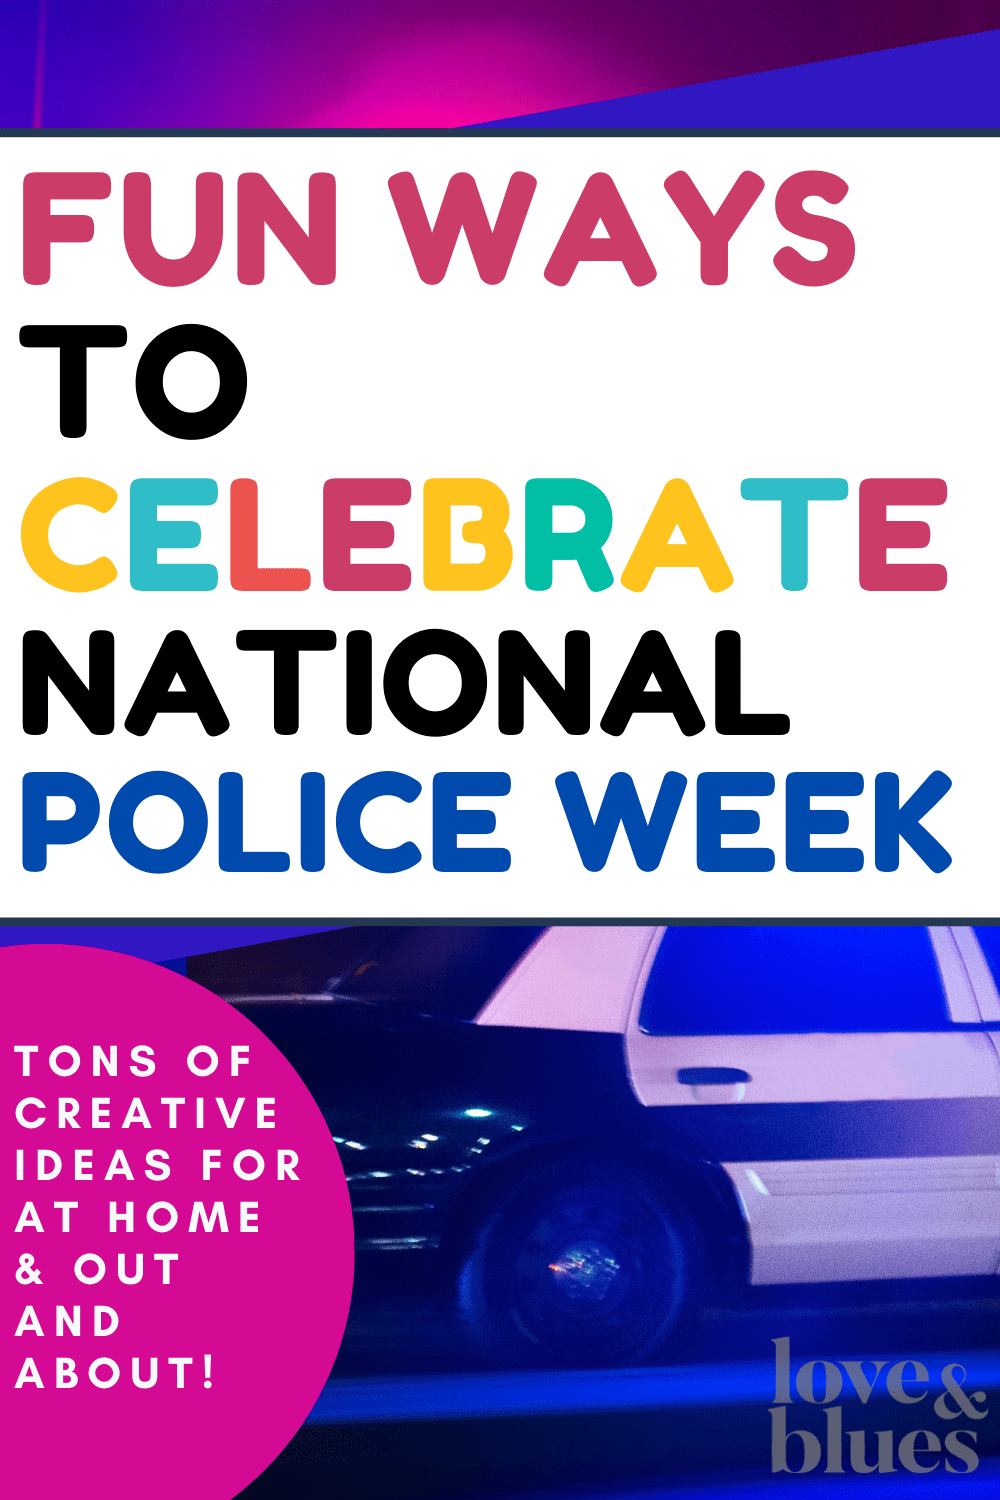 Such fun ideas to celebrate national police week!!